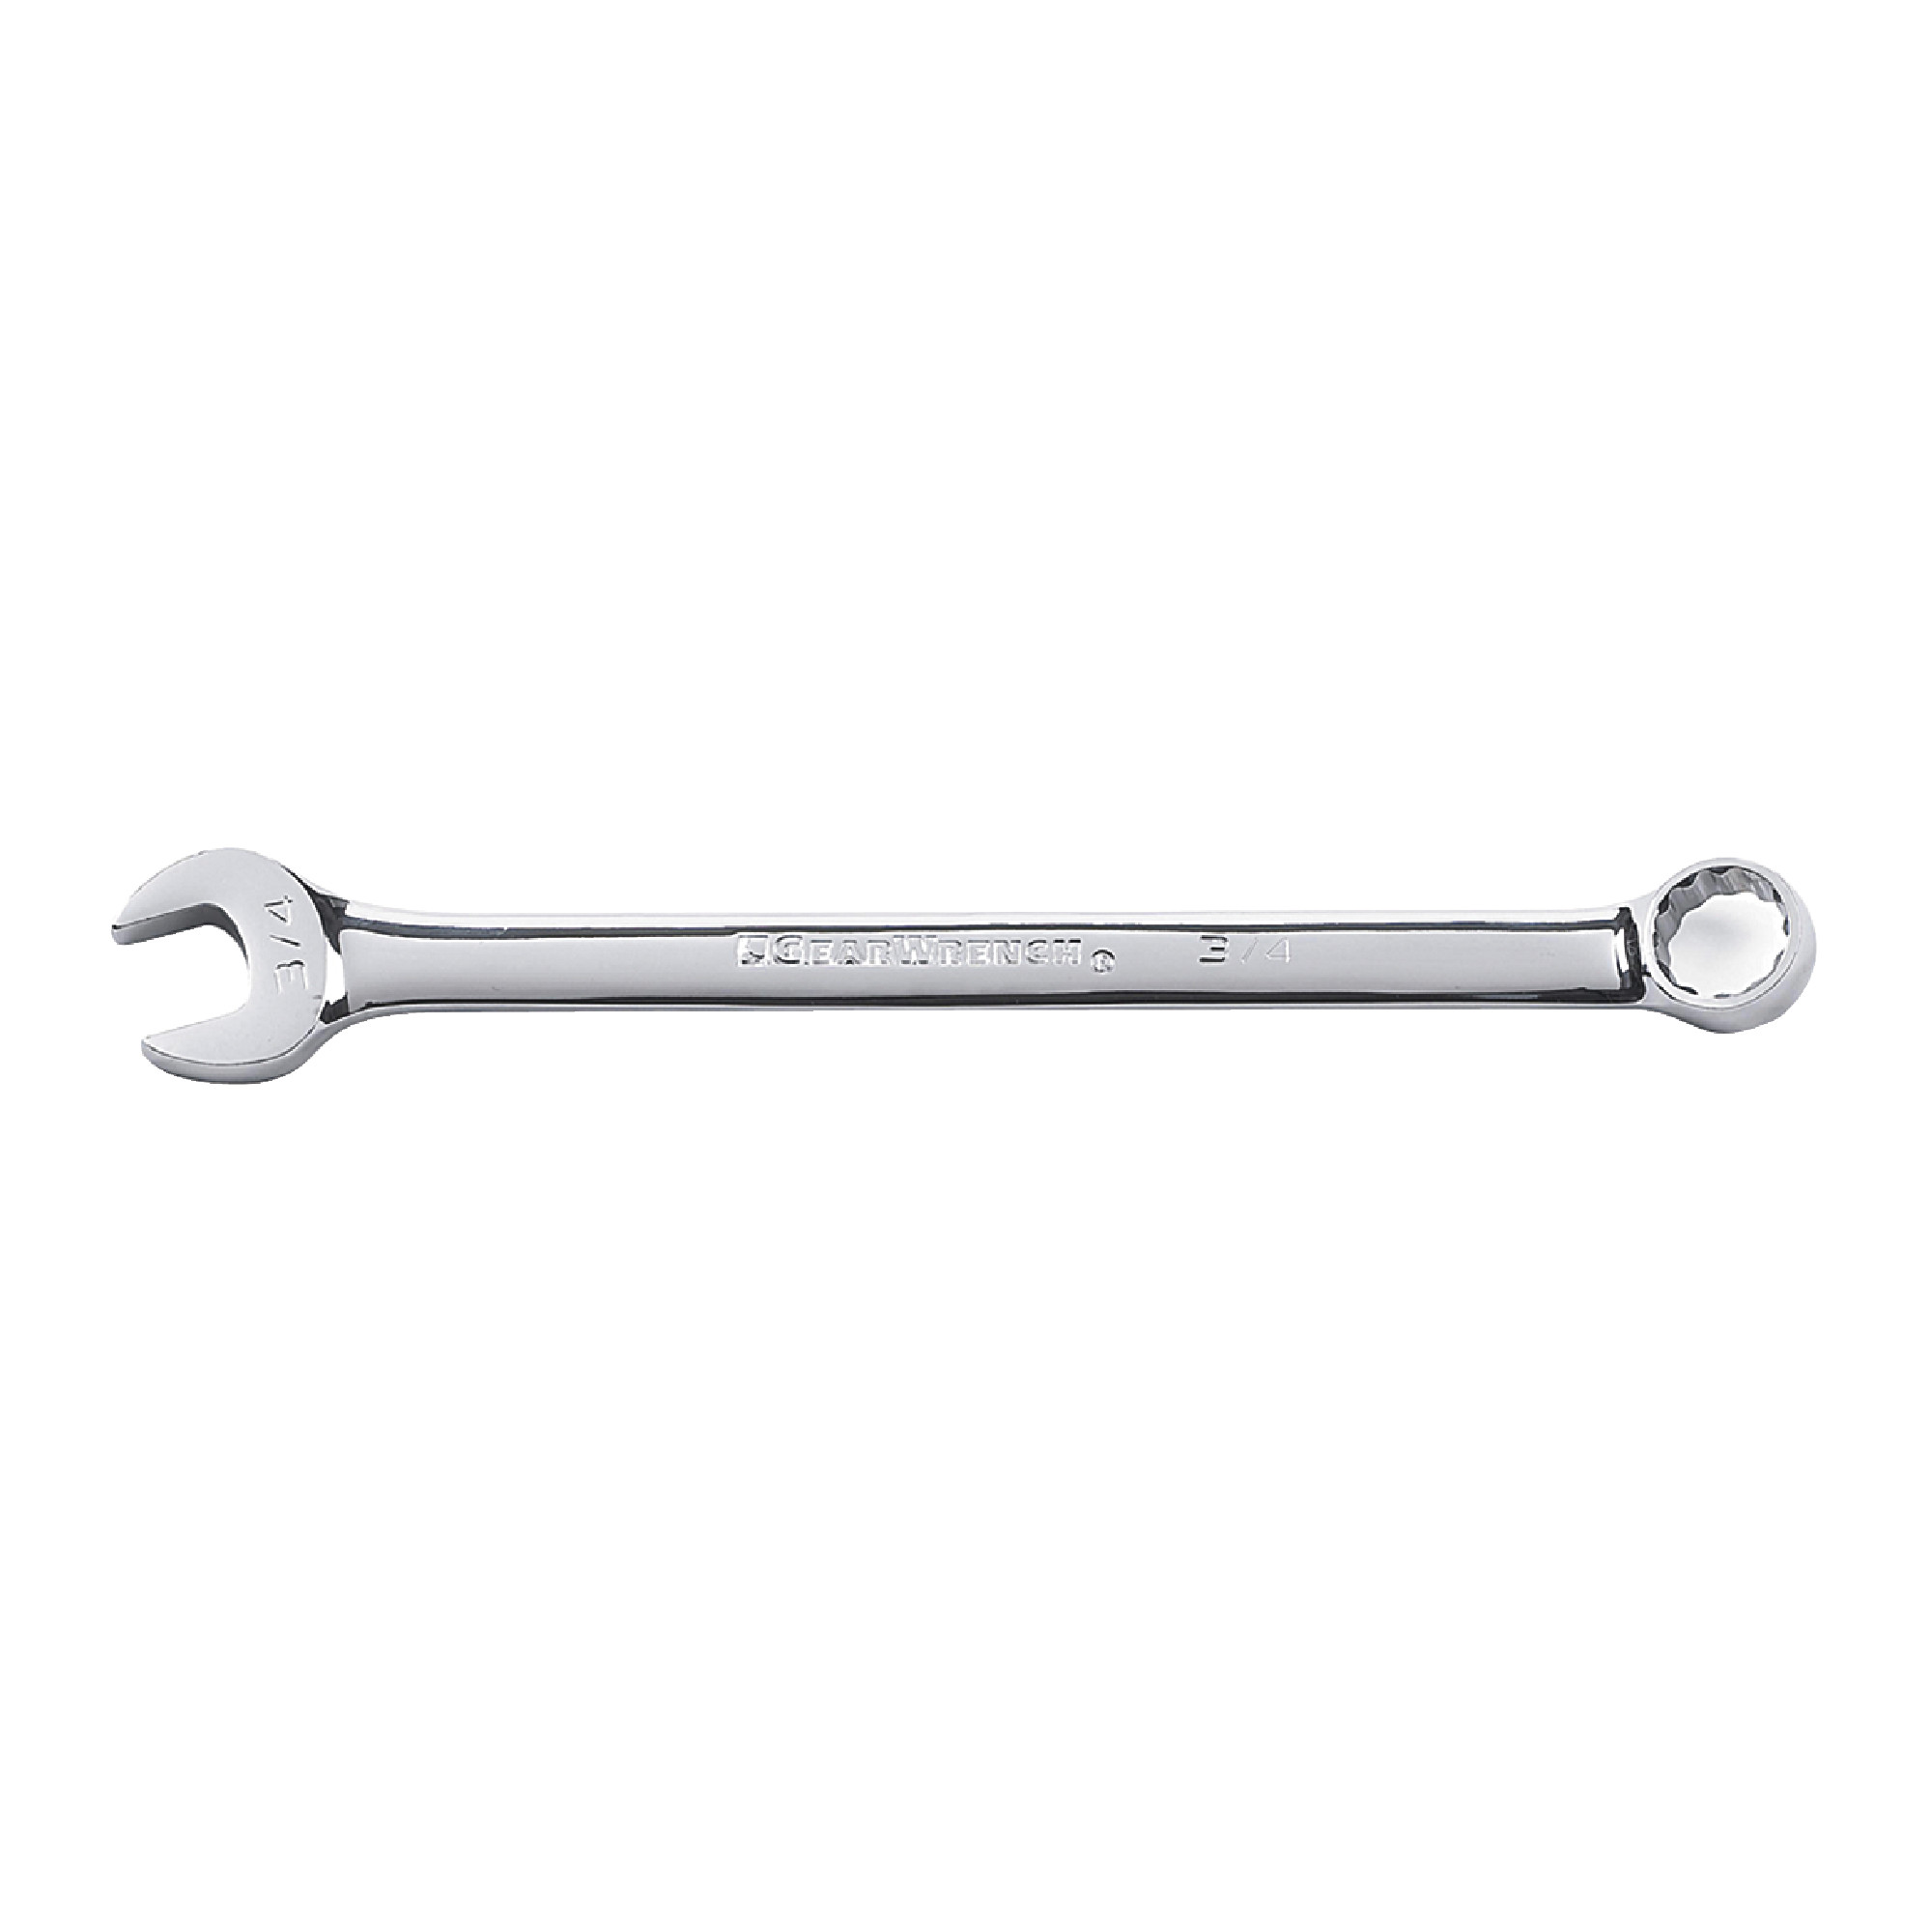 7/16" 12 Point Long Pattern Combination Wrench